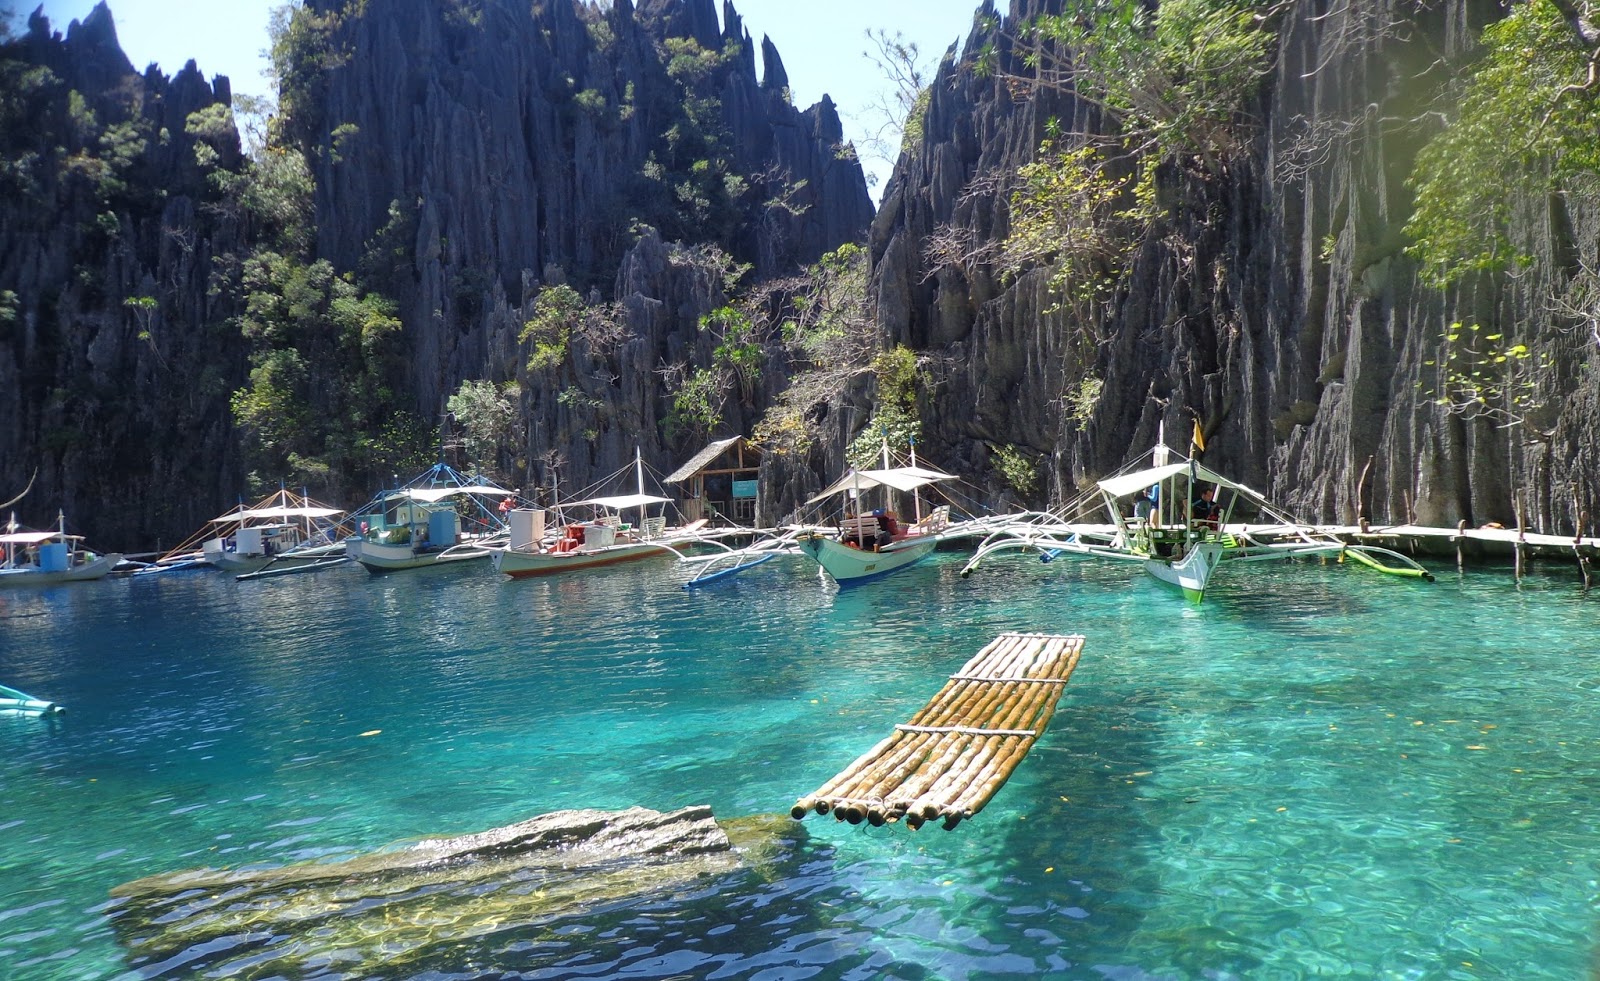 Coron, Palawan: Make Sure To See These 8 Places When You Visit This